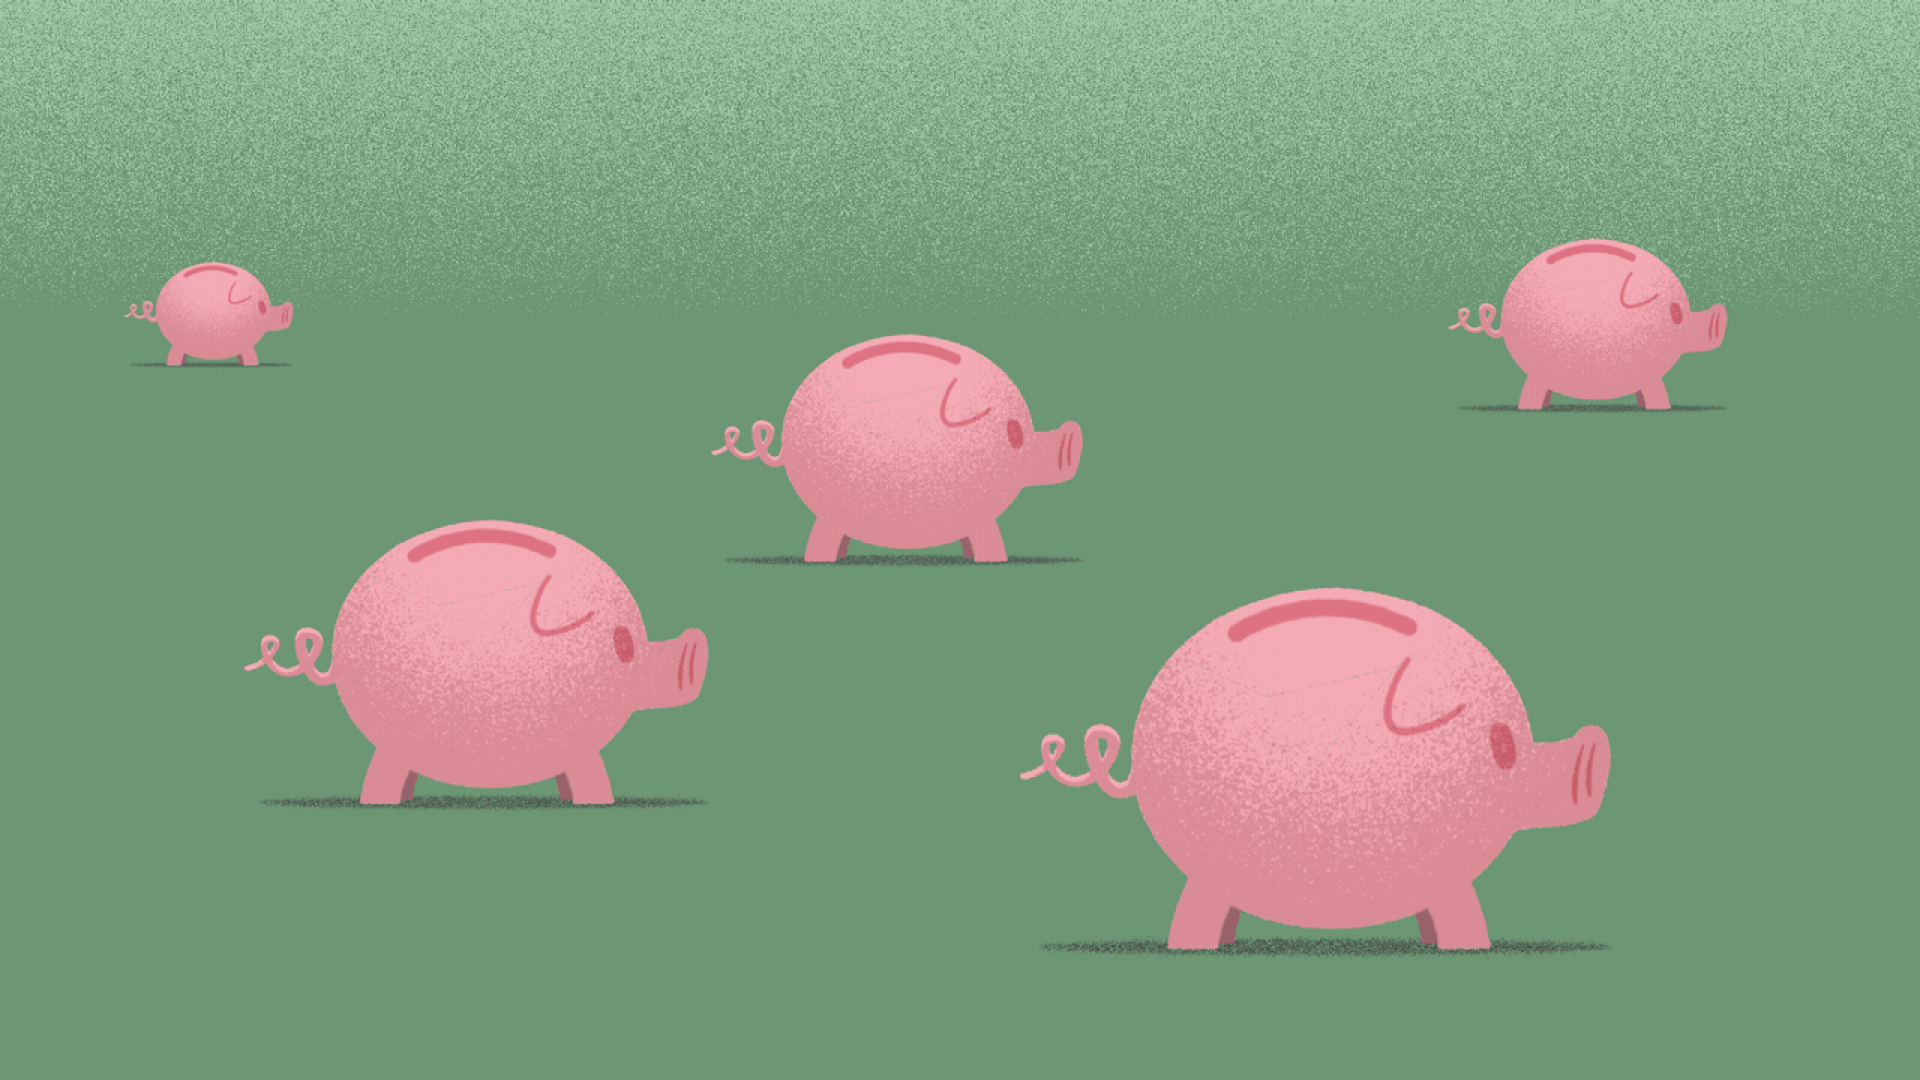 Illustration of a series of small piggy banks, exploding one after another, leaving smoldering craters behind.